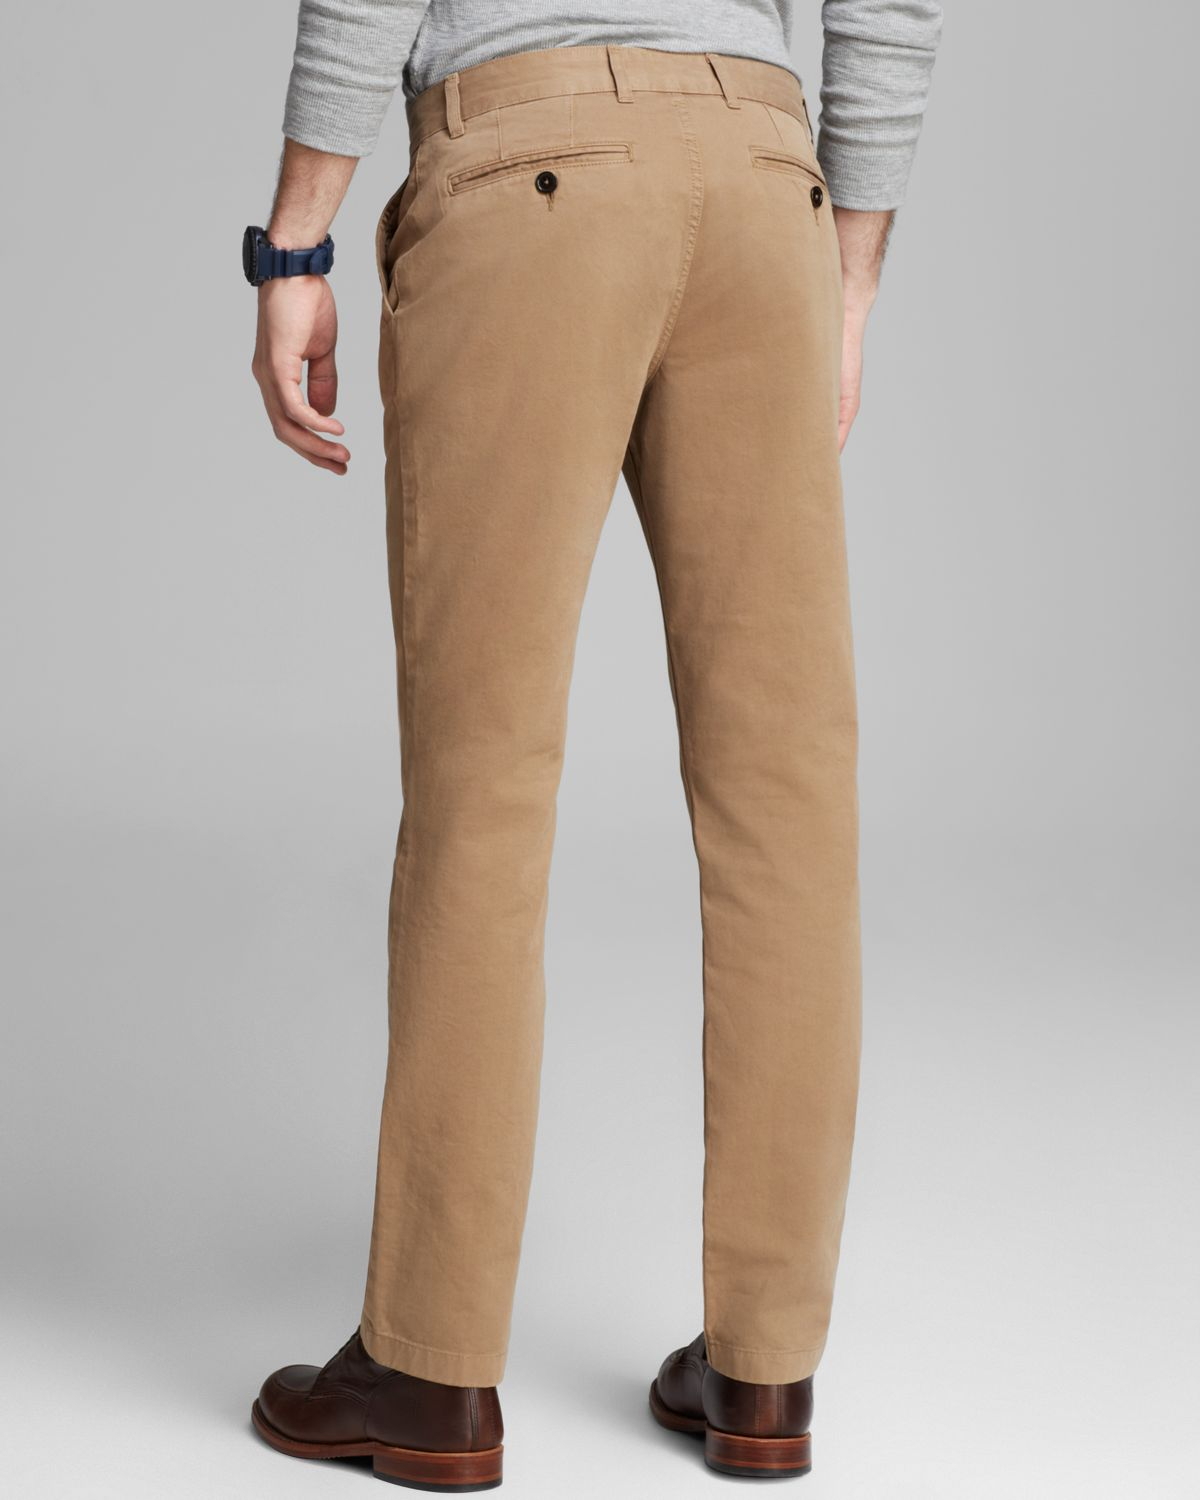 Lyst - Barbour Pantone Collection Chino Pants in Natural for Men